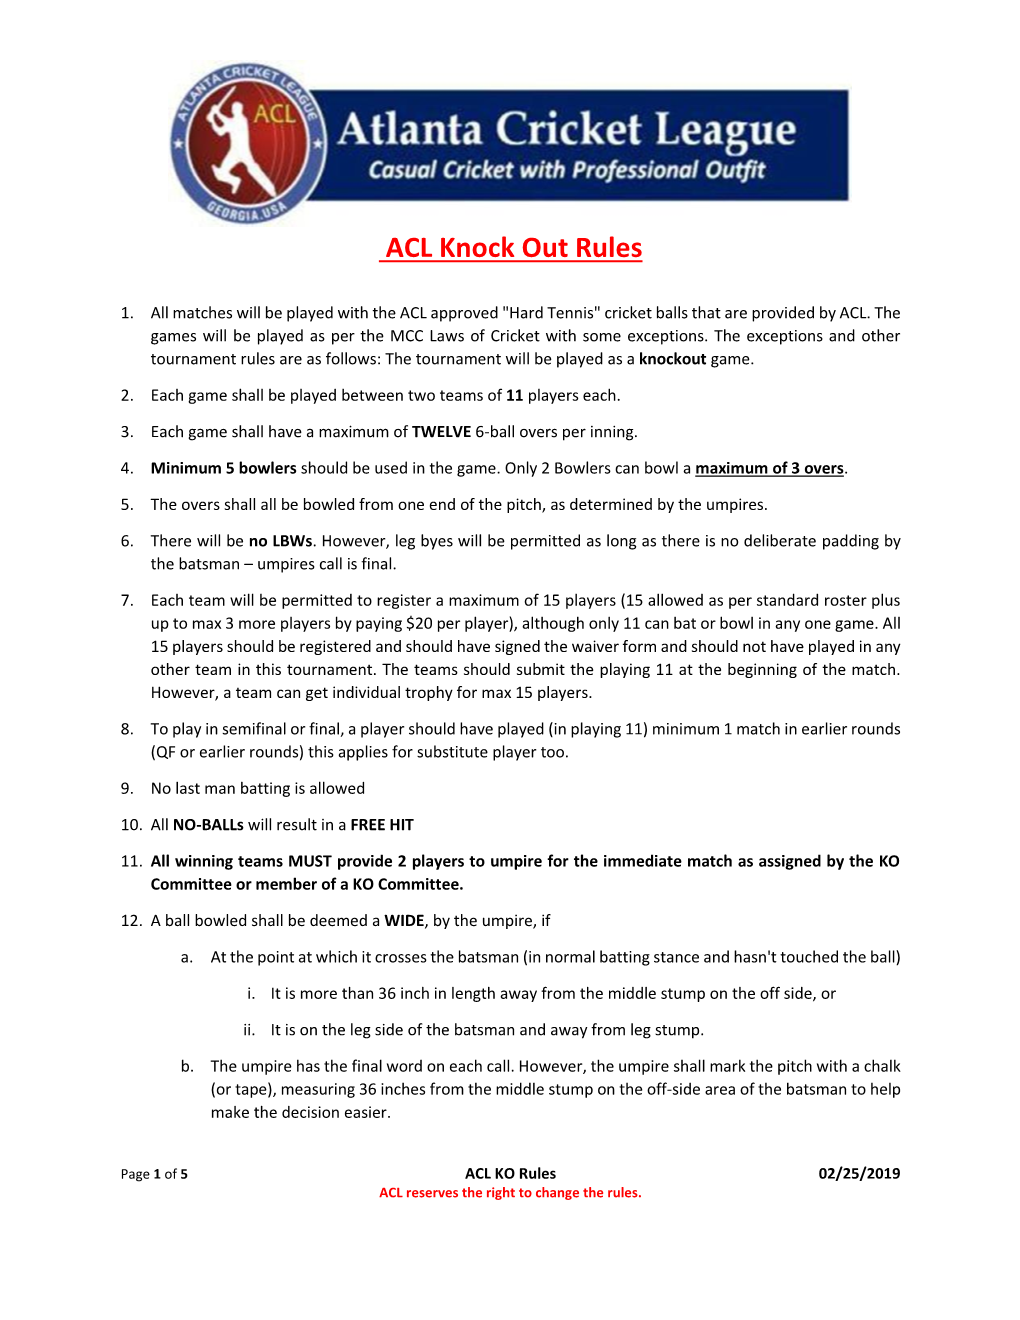 ACL Knock out Rules